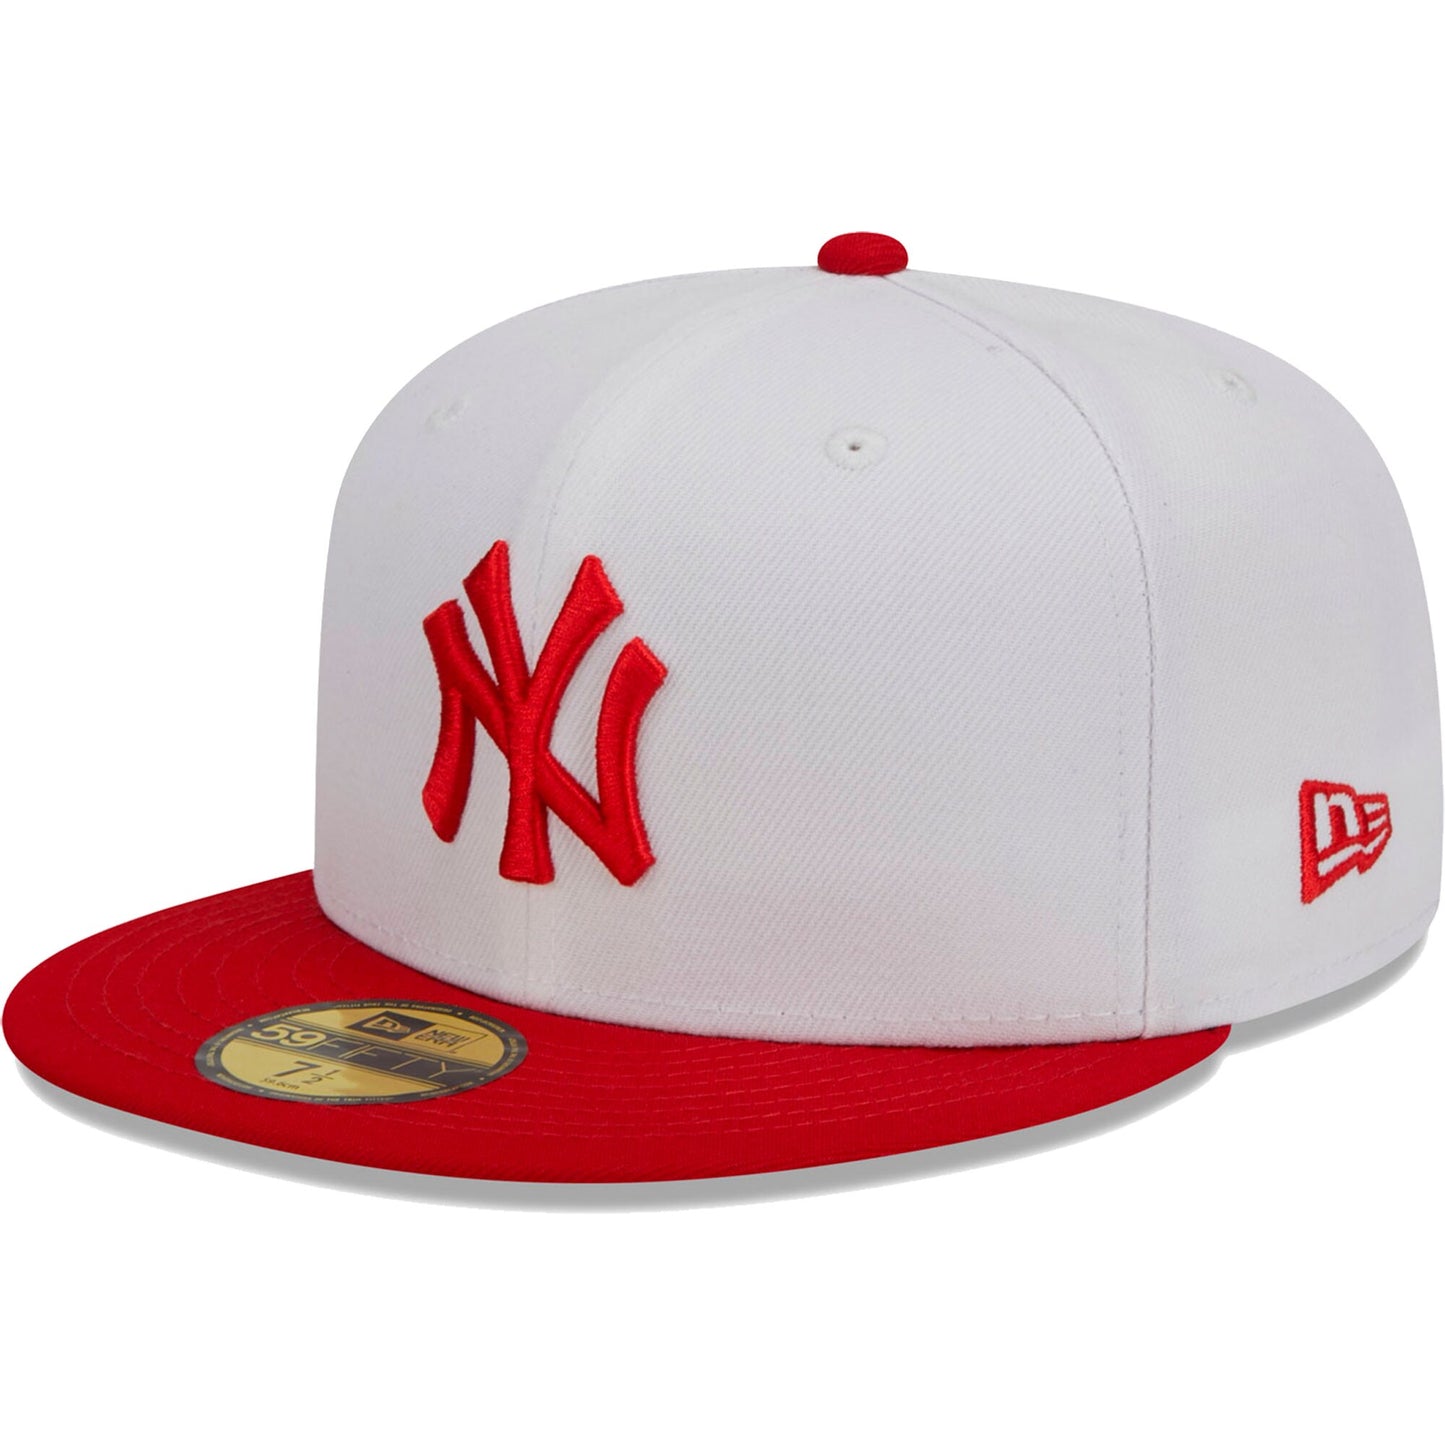 New York Yankees New Era Optic 59FIFTY Fitted Hat - White/Red